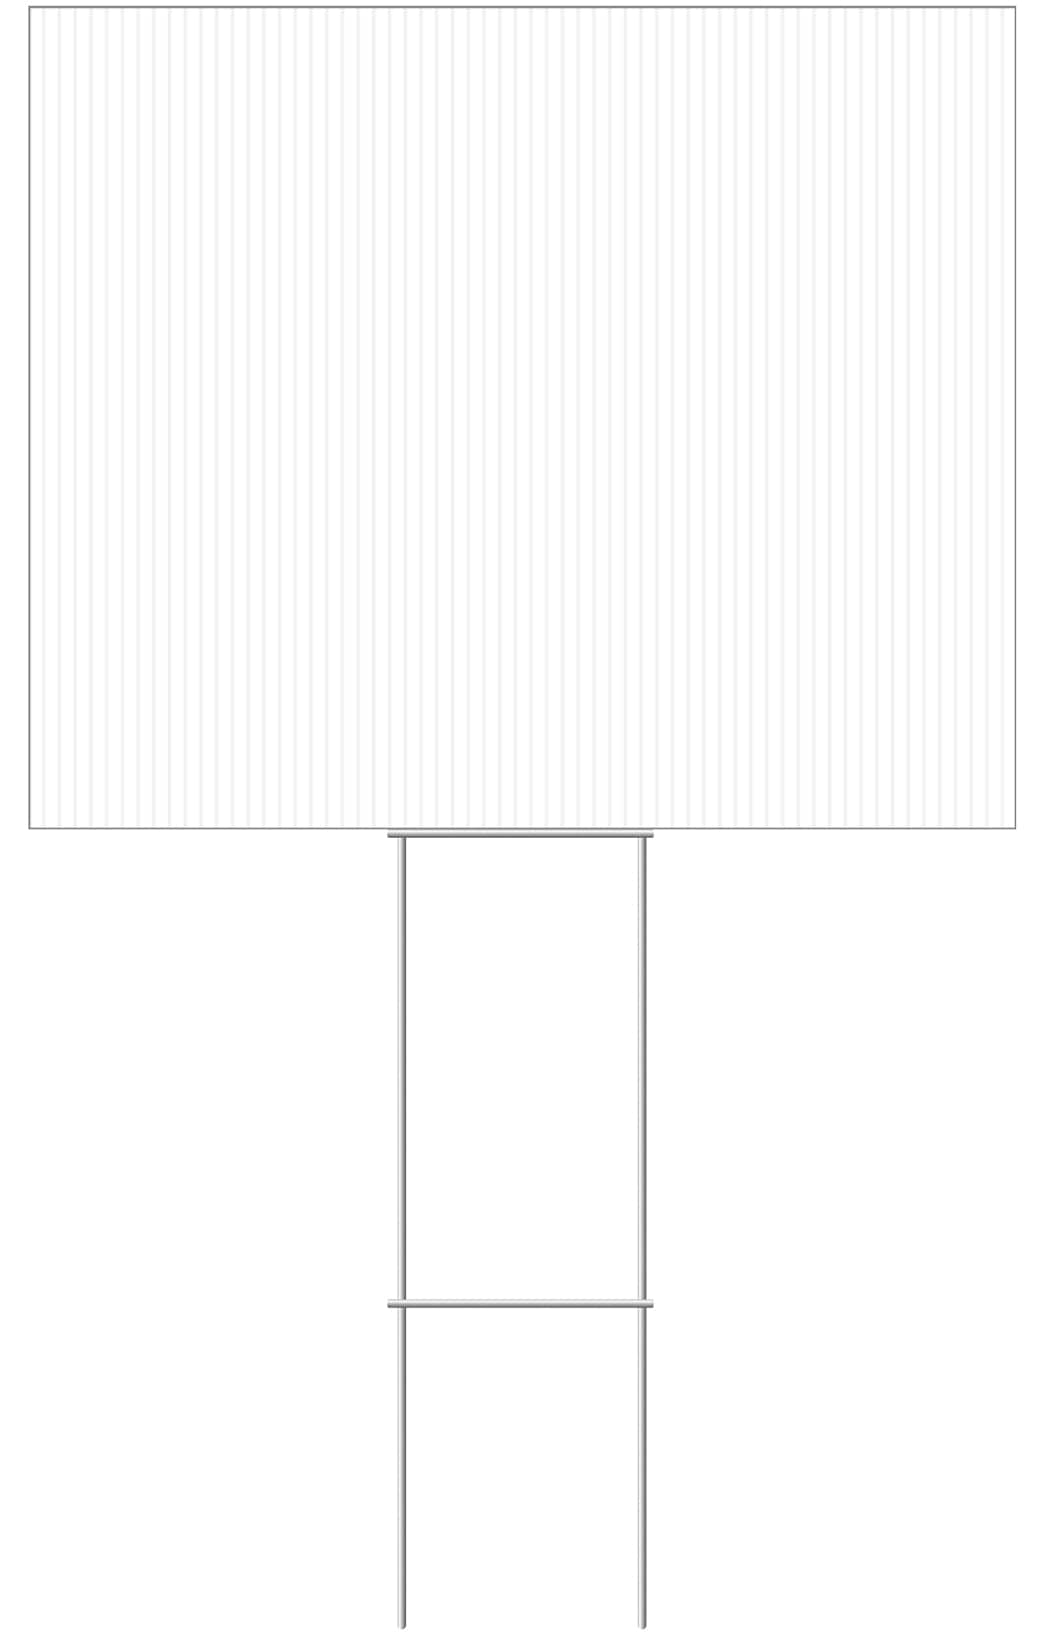 Details about   Durable 18in x 26in 1 3 5 7 10 15 or 20 DIY Blank White Yard Sign Kit W/ H Frame 